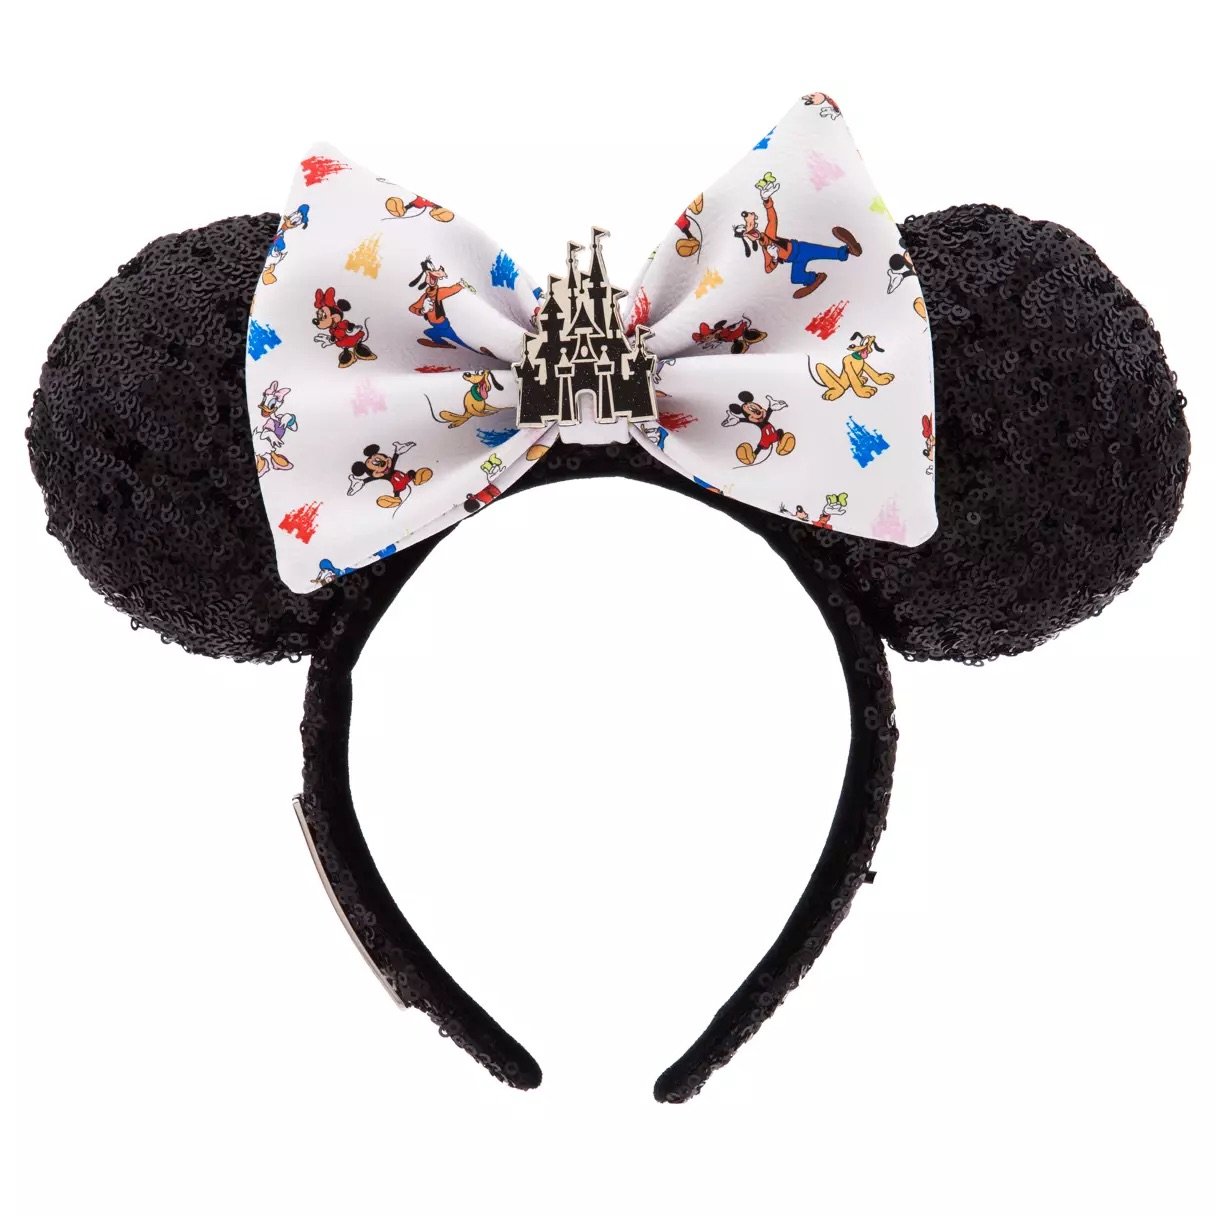 Minnie Mouse and Friends Loungefly Ear Headband for Adults shopDisney Mickey Mouse and Friends Merchandise Collection January 2023.jpeg